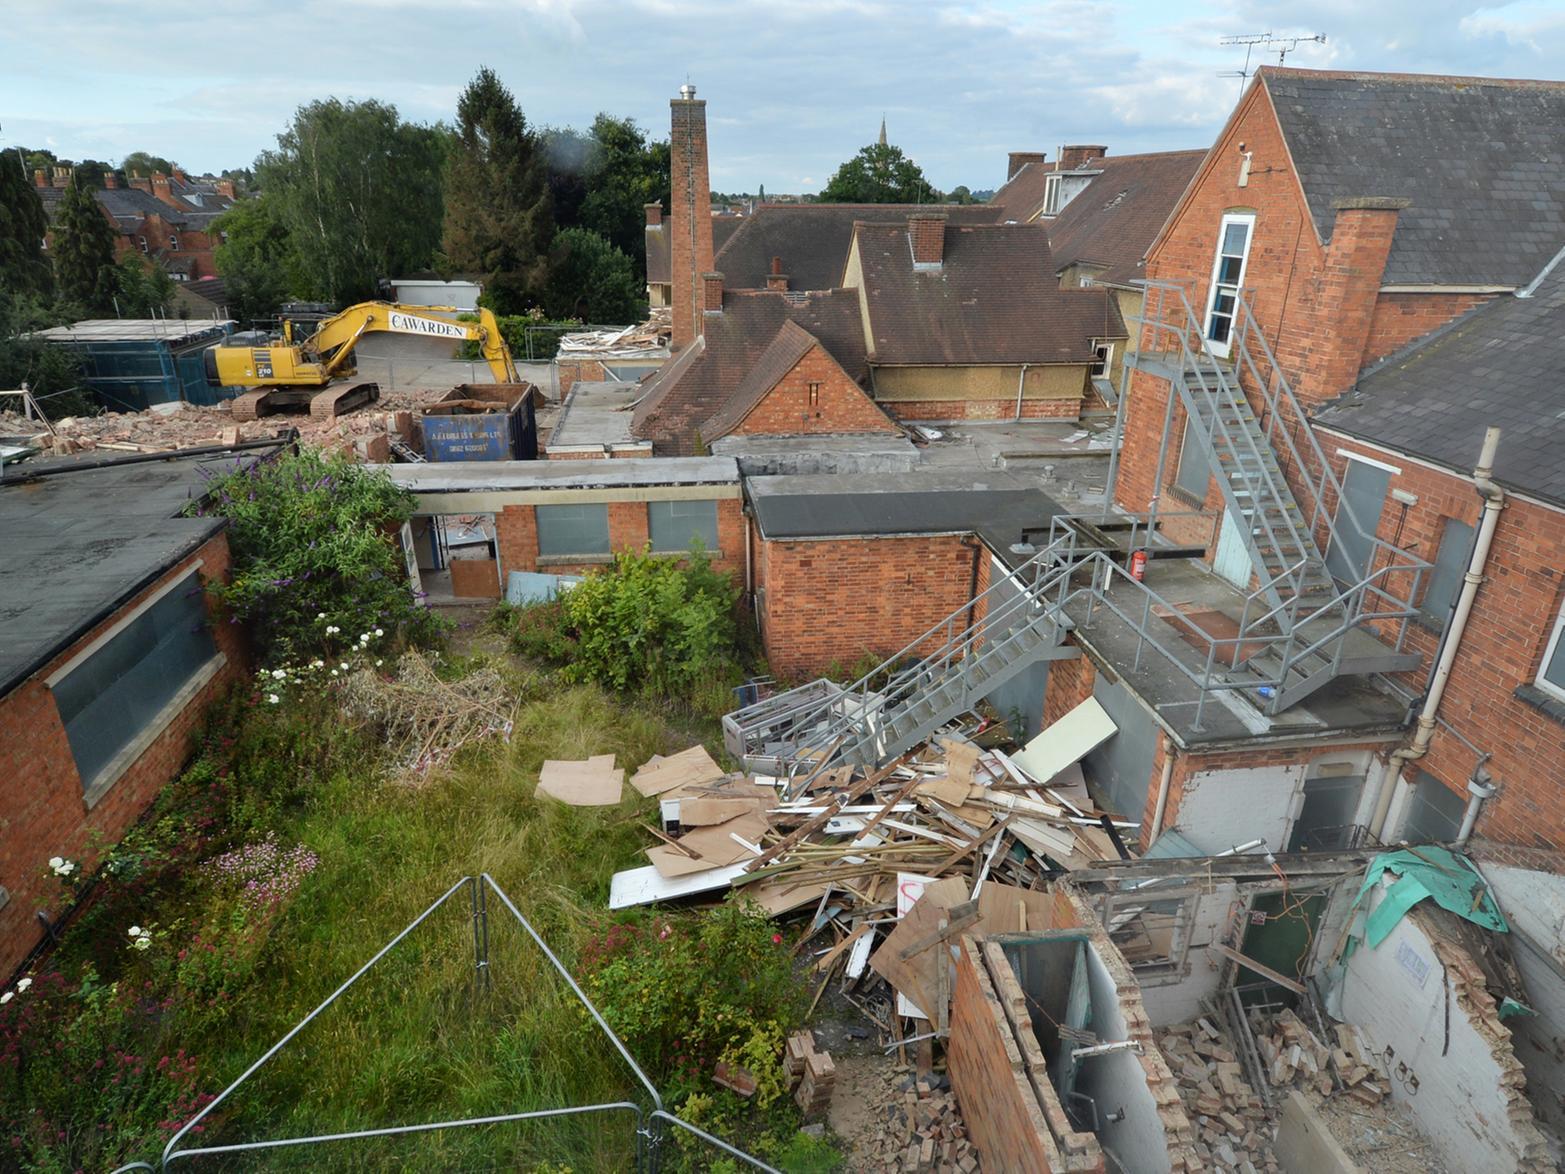 Work to demolish Market Harborough's old cottage hospital got underway in July.
Crews moved in to demolish the former cottage hospital off Coventry Road in Market Harborough.
The work will clear most of the site in preparation for a luxury new 70-bed care home. The Grade II listed war memorial portico will be carefully retained and incorporated into the new building.
The red brick-built care home will occupy much the same footprint as the redundant hospital, developers say.